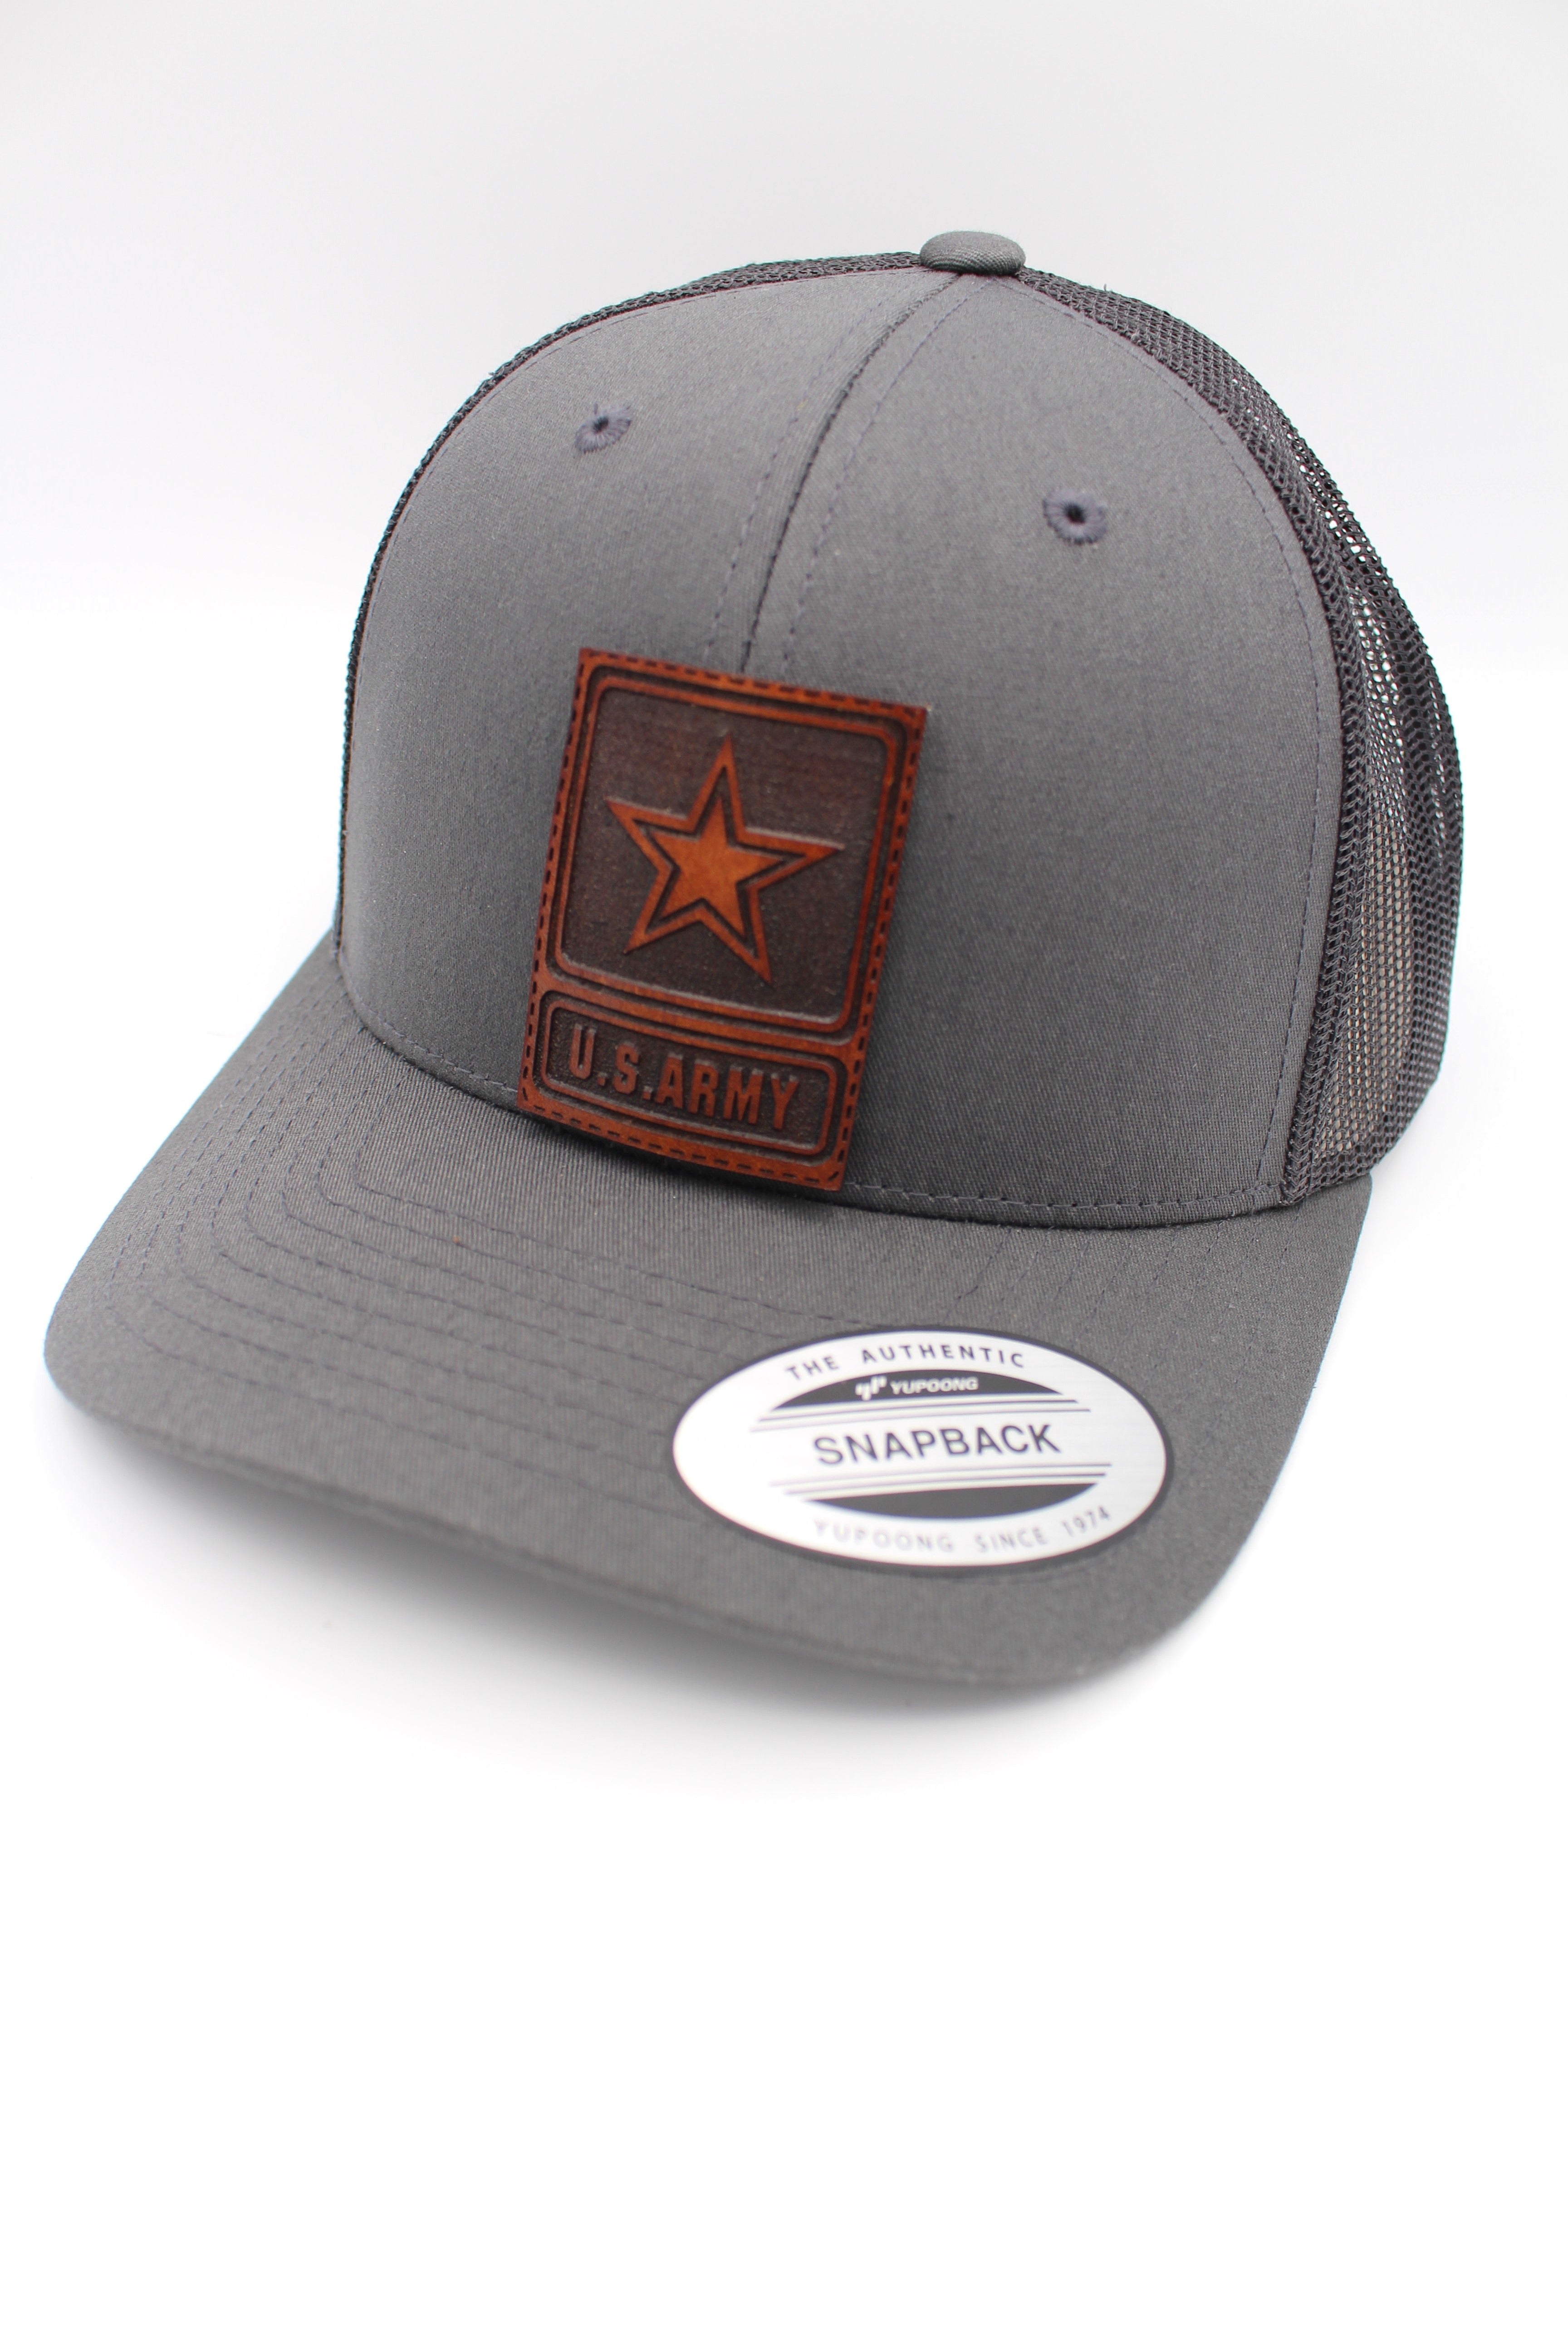 BluTwon Studio, handcraft leather patch trucker hats and more ...